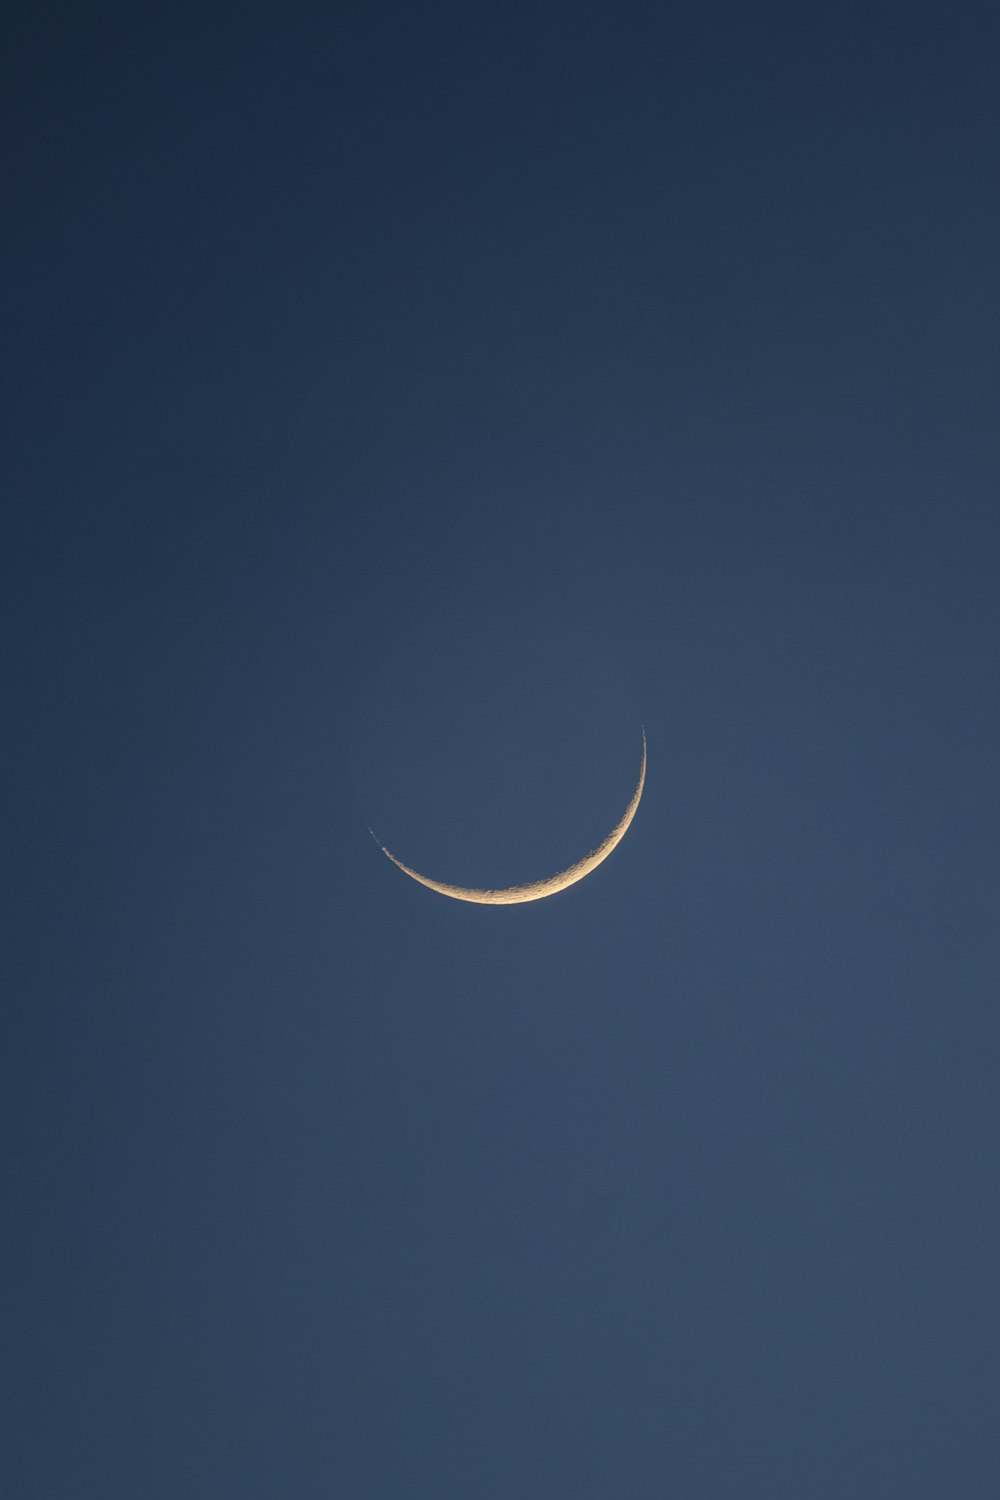 a crescent moon in a clear blue sky